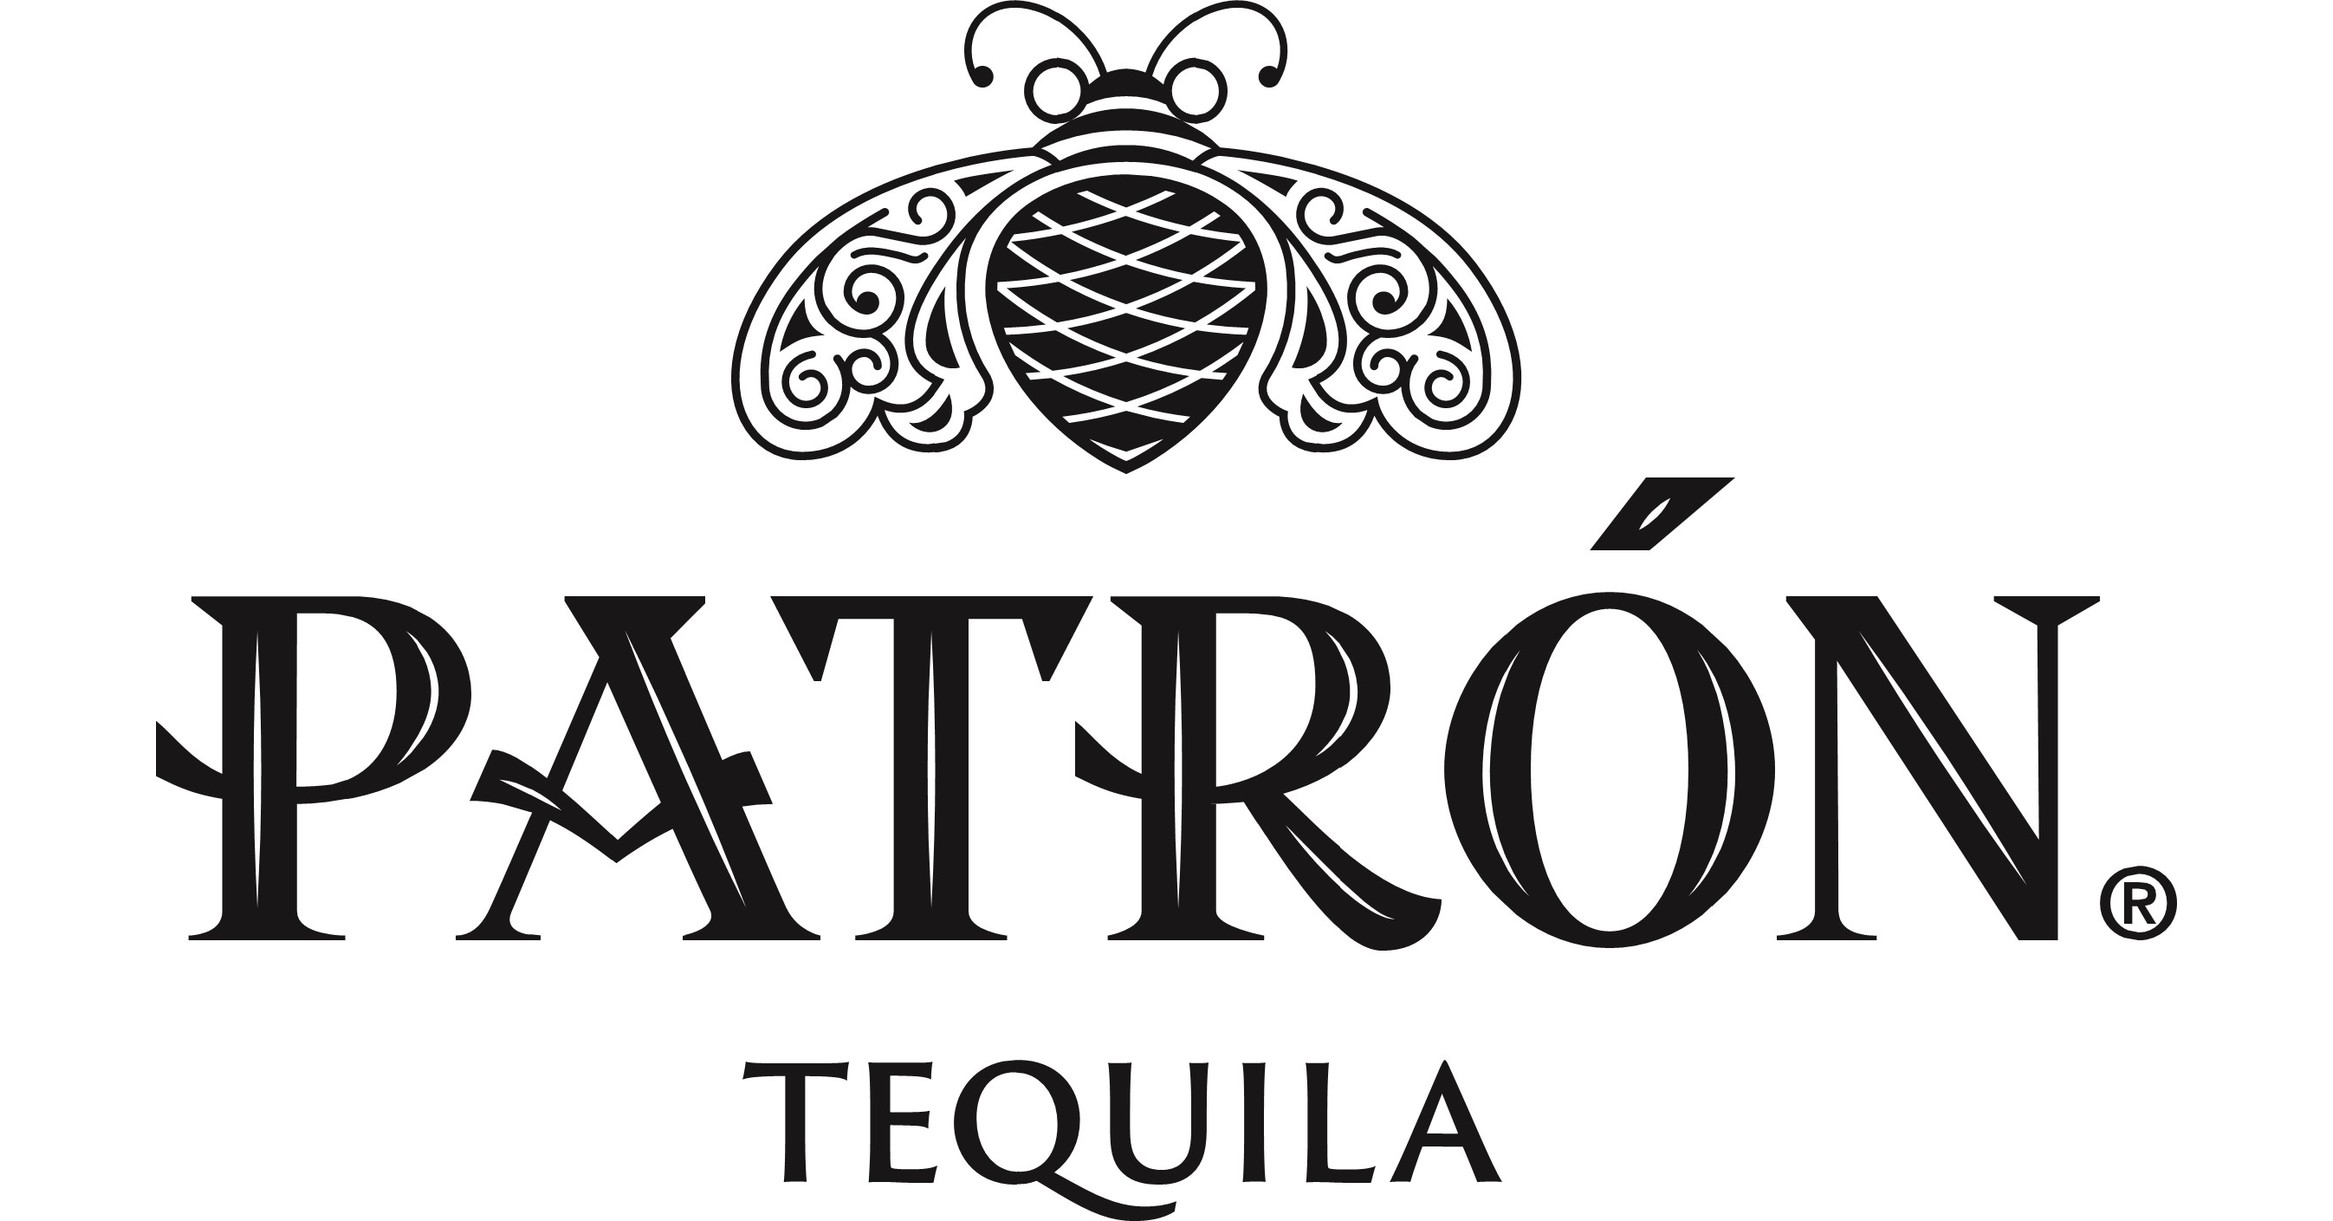 Beyond the Bottle: Why Patron Tequila is a Symbol of Luxury & Prestige